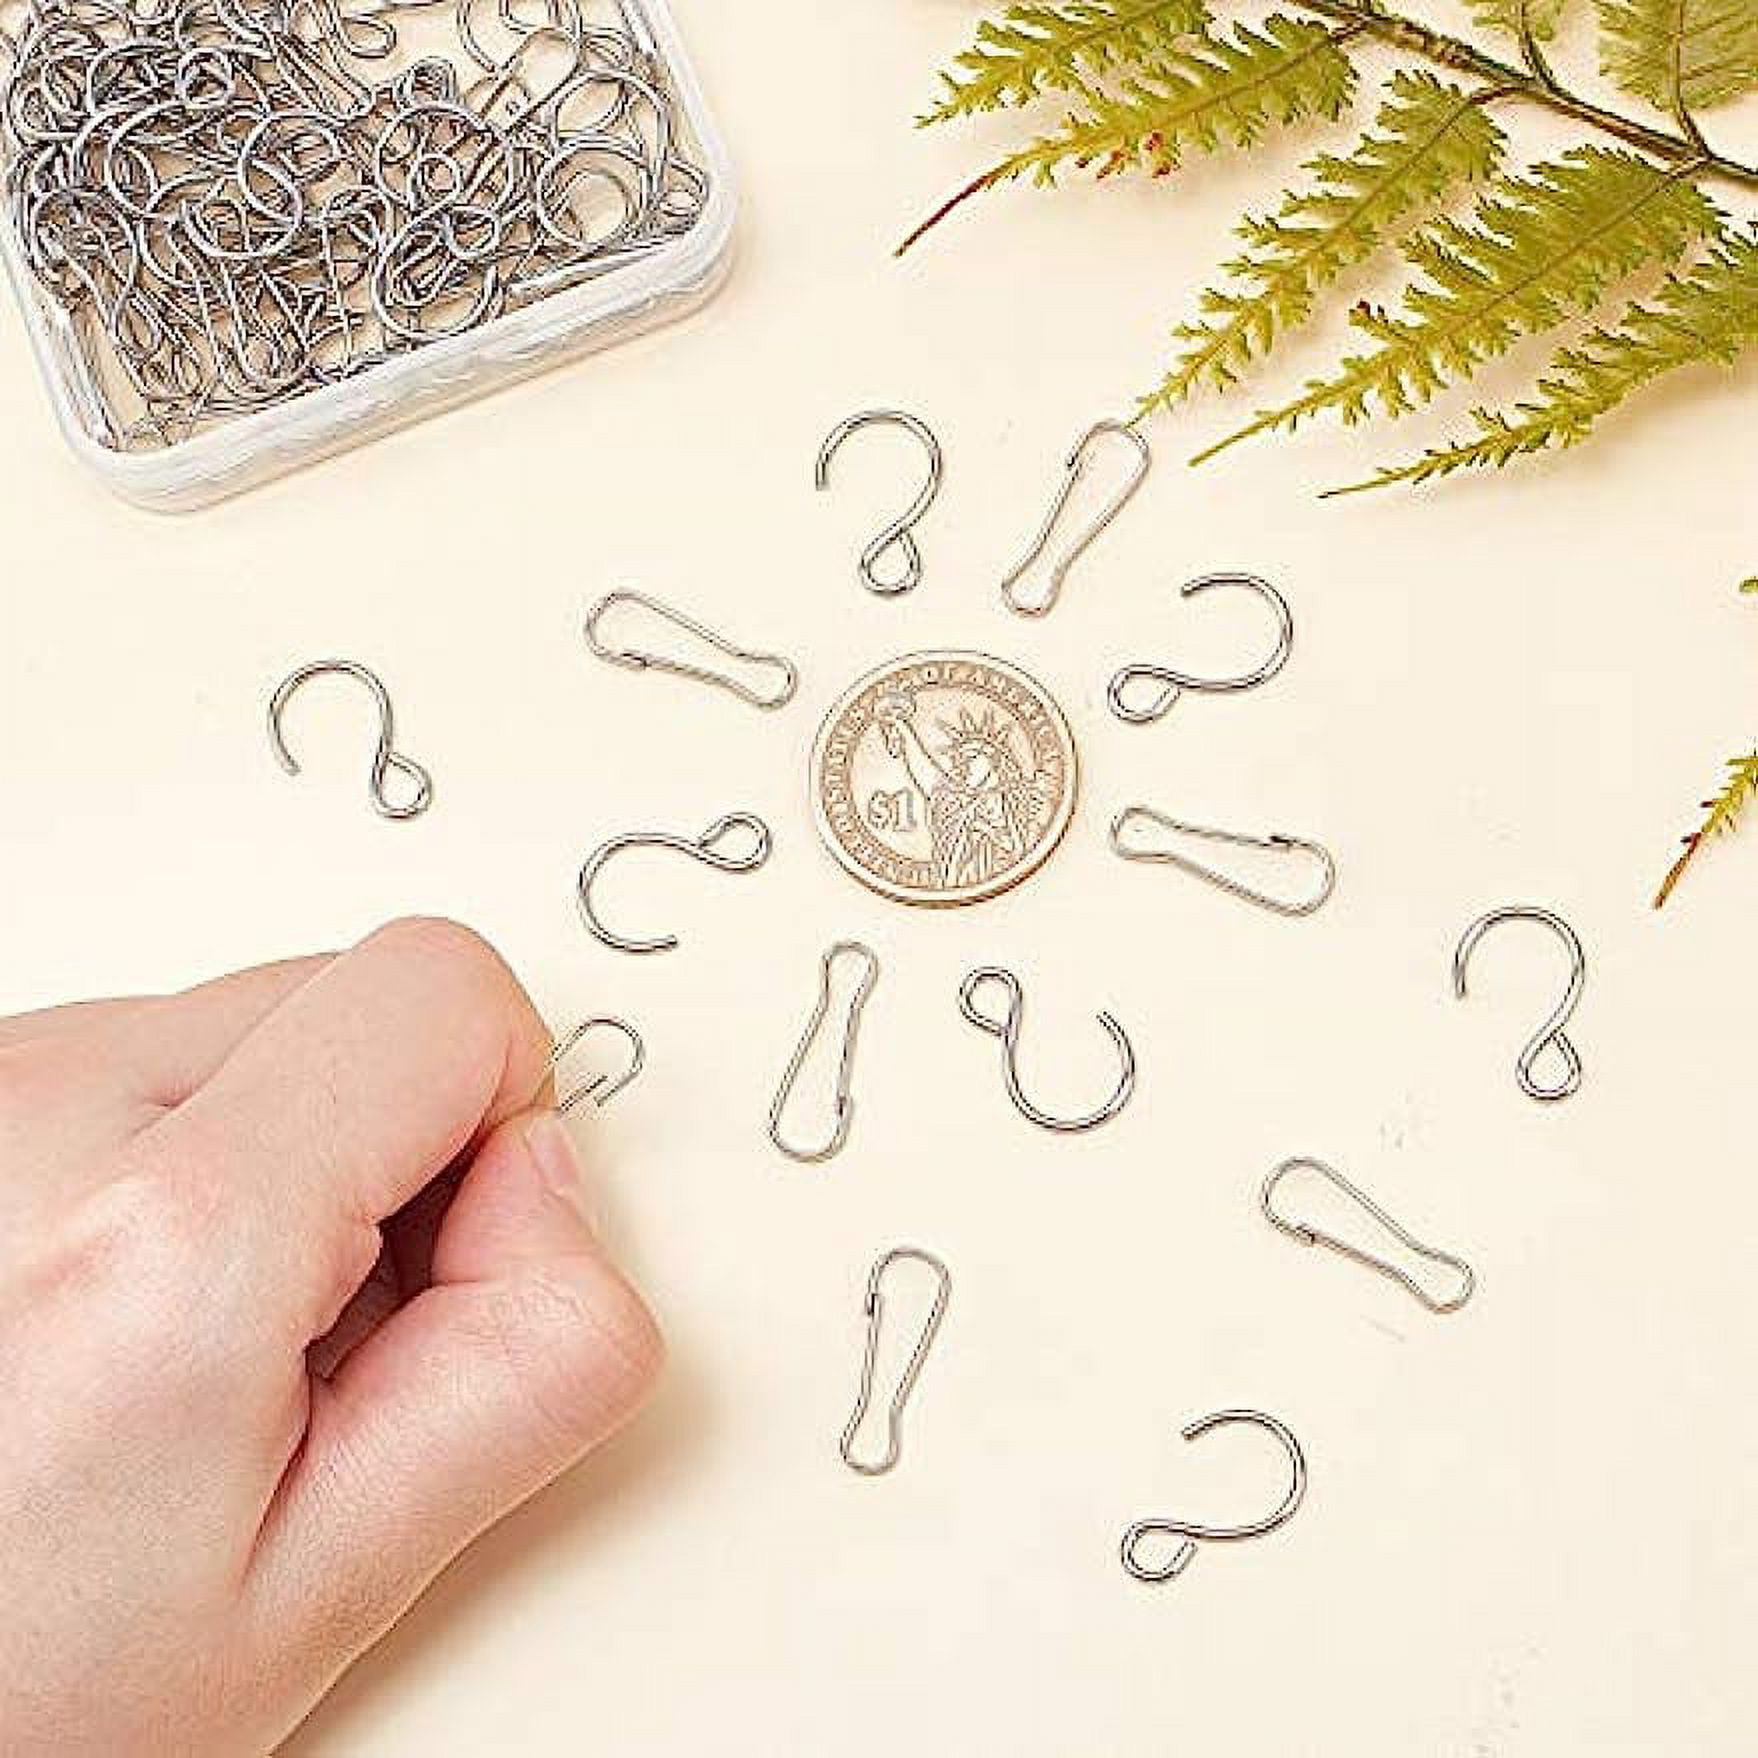 60pcs 2 Colors S-Hook Necklace Clasp 304 Stainless Steel Chain Clasps Metal S Hooks Clasps Connectors S-Shaped Hook for Necklace Bracelet Jewelry